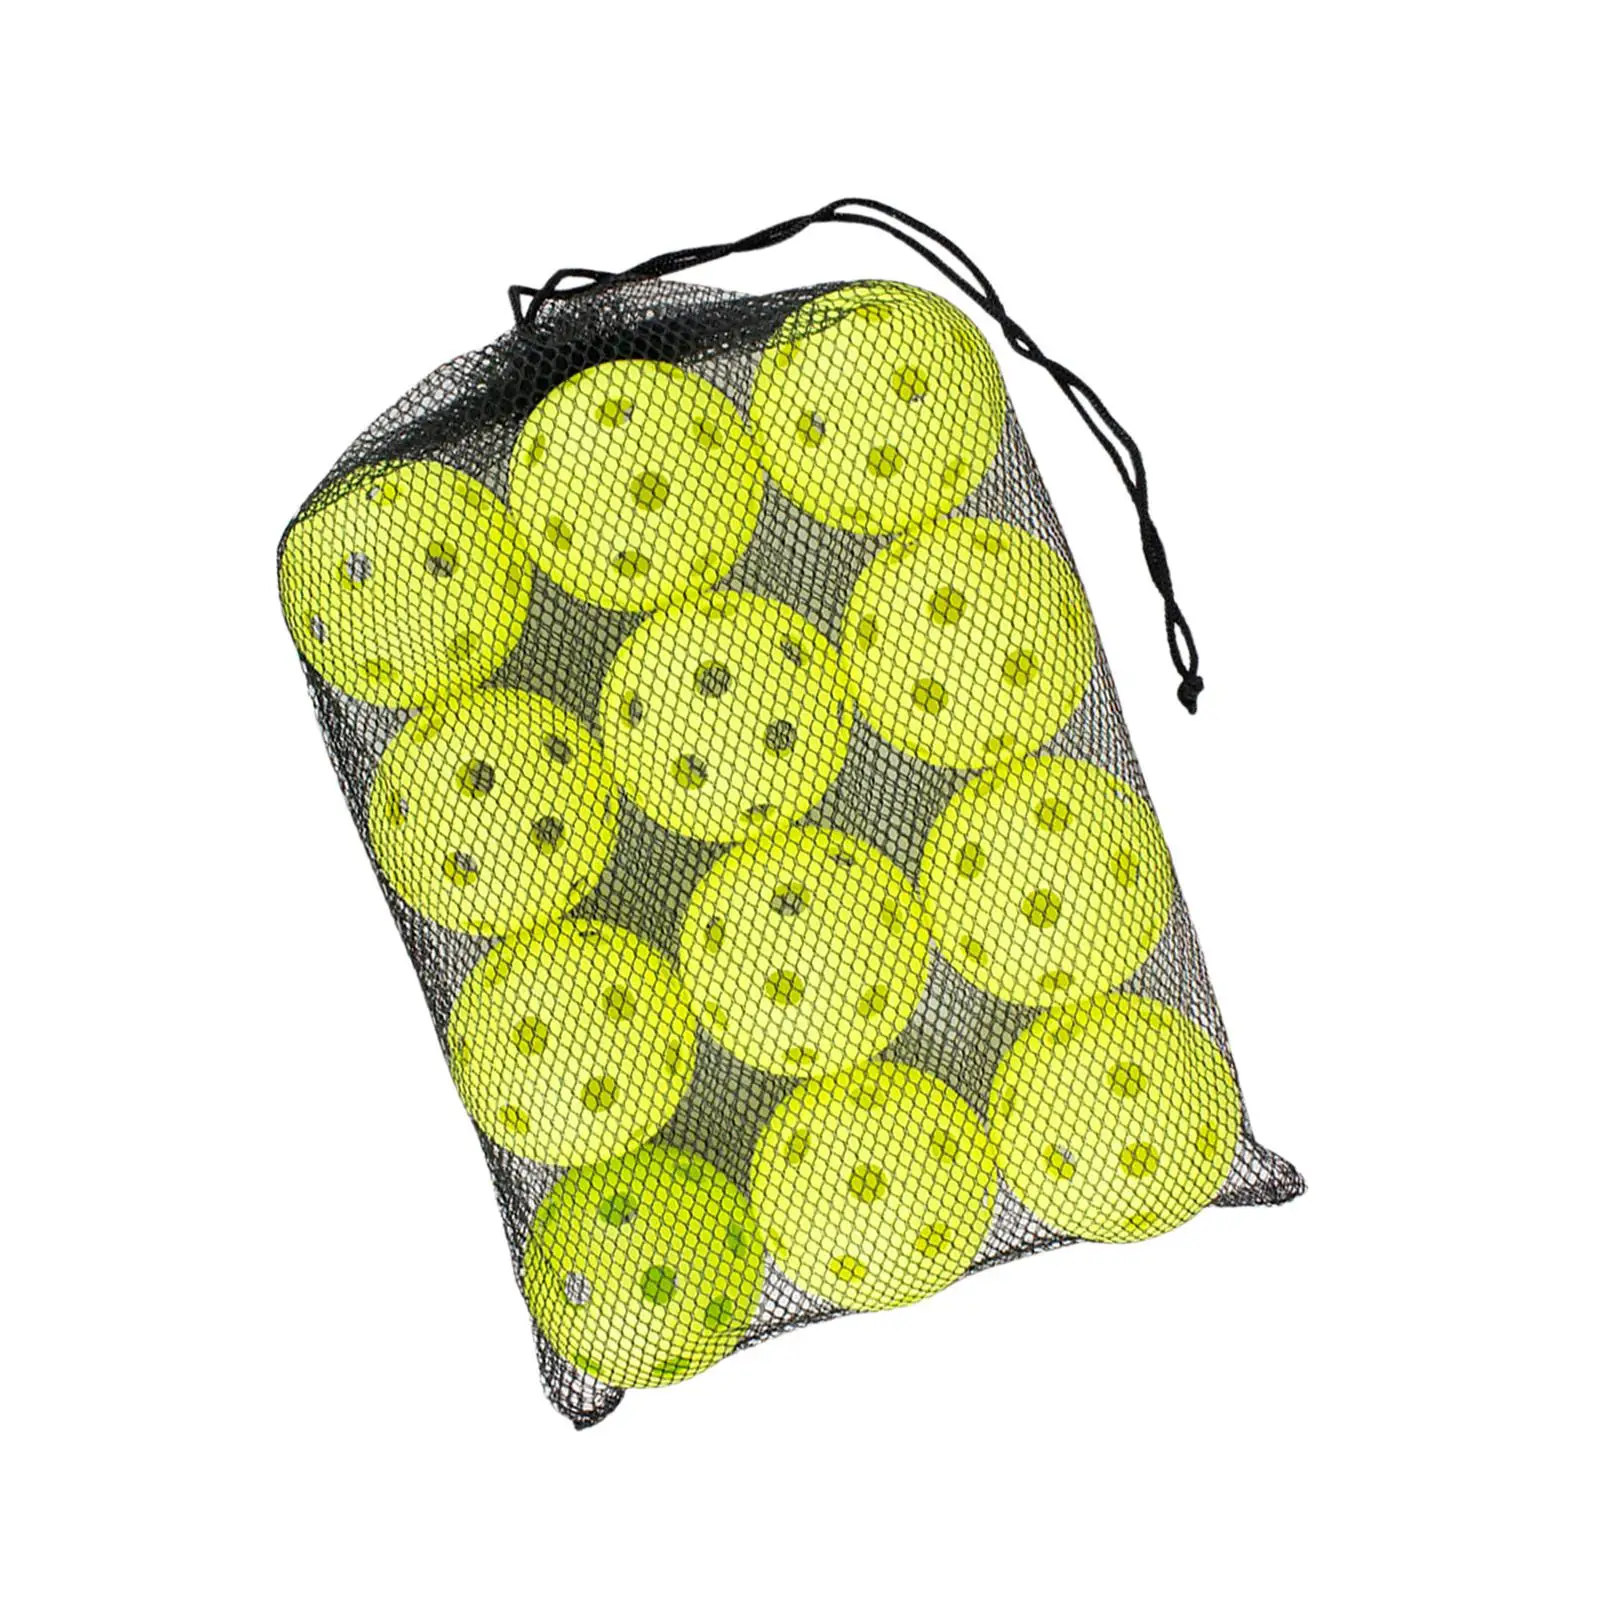 12x Pickleball Balls Professional Pickle Ball Adult Outdoor Sporting Goods Durable for Sanctioned Tournament Play with Mesh Bag